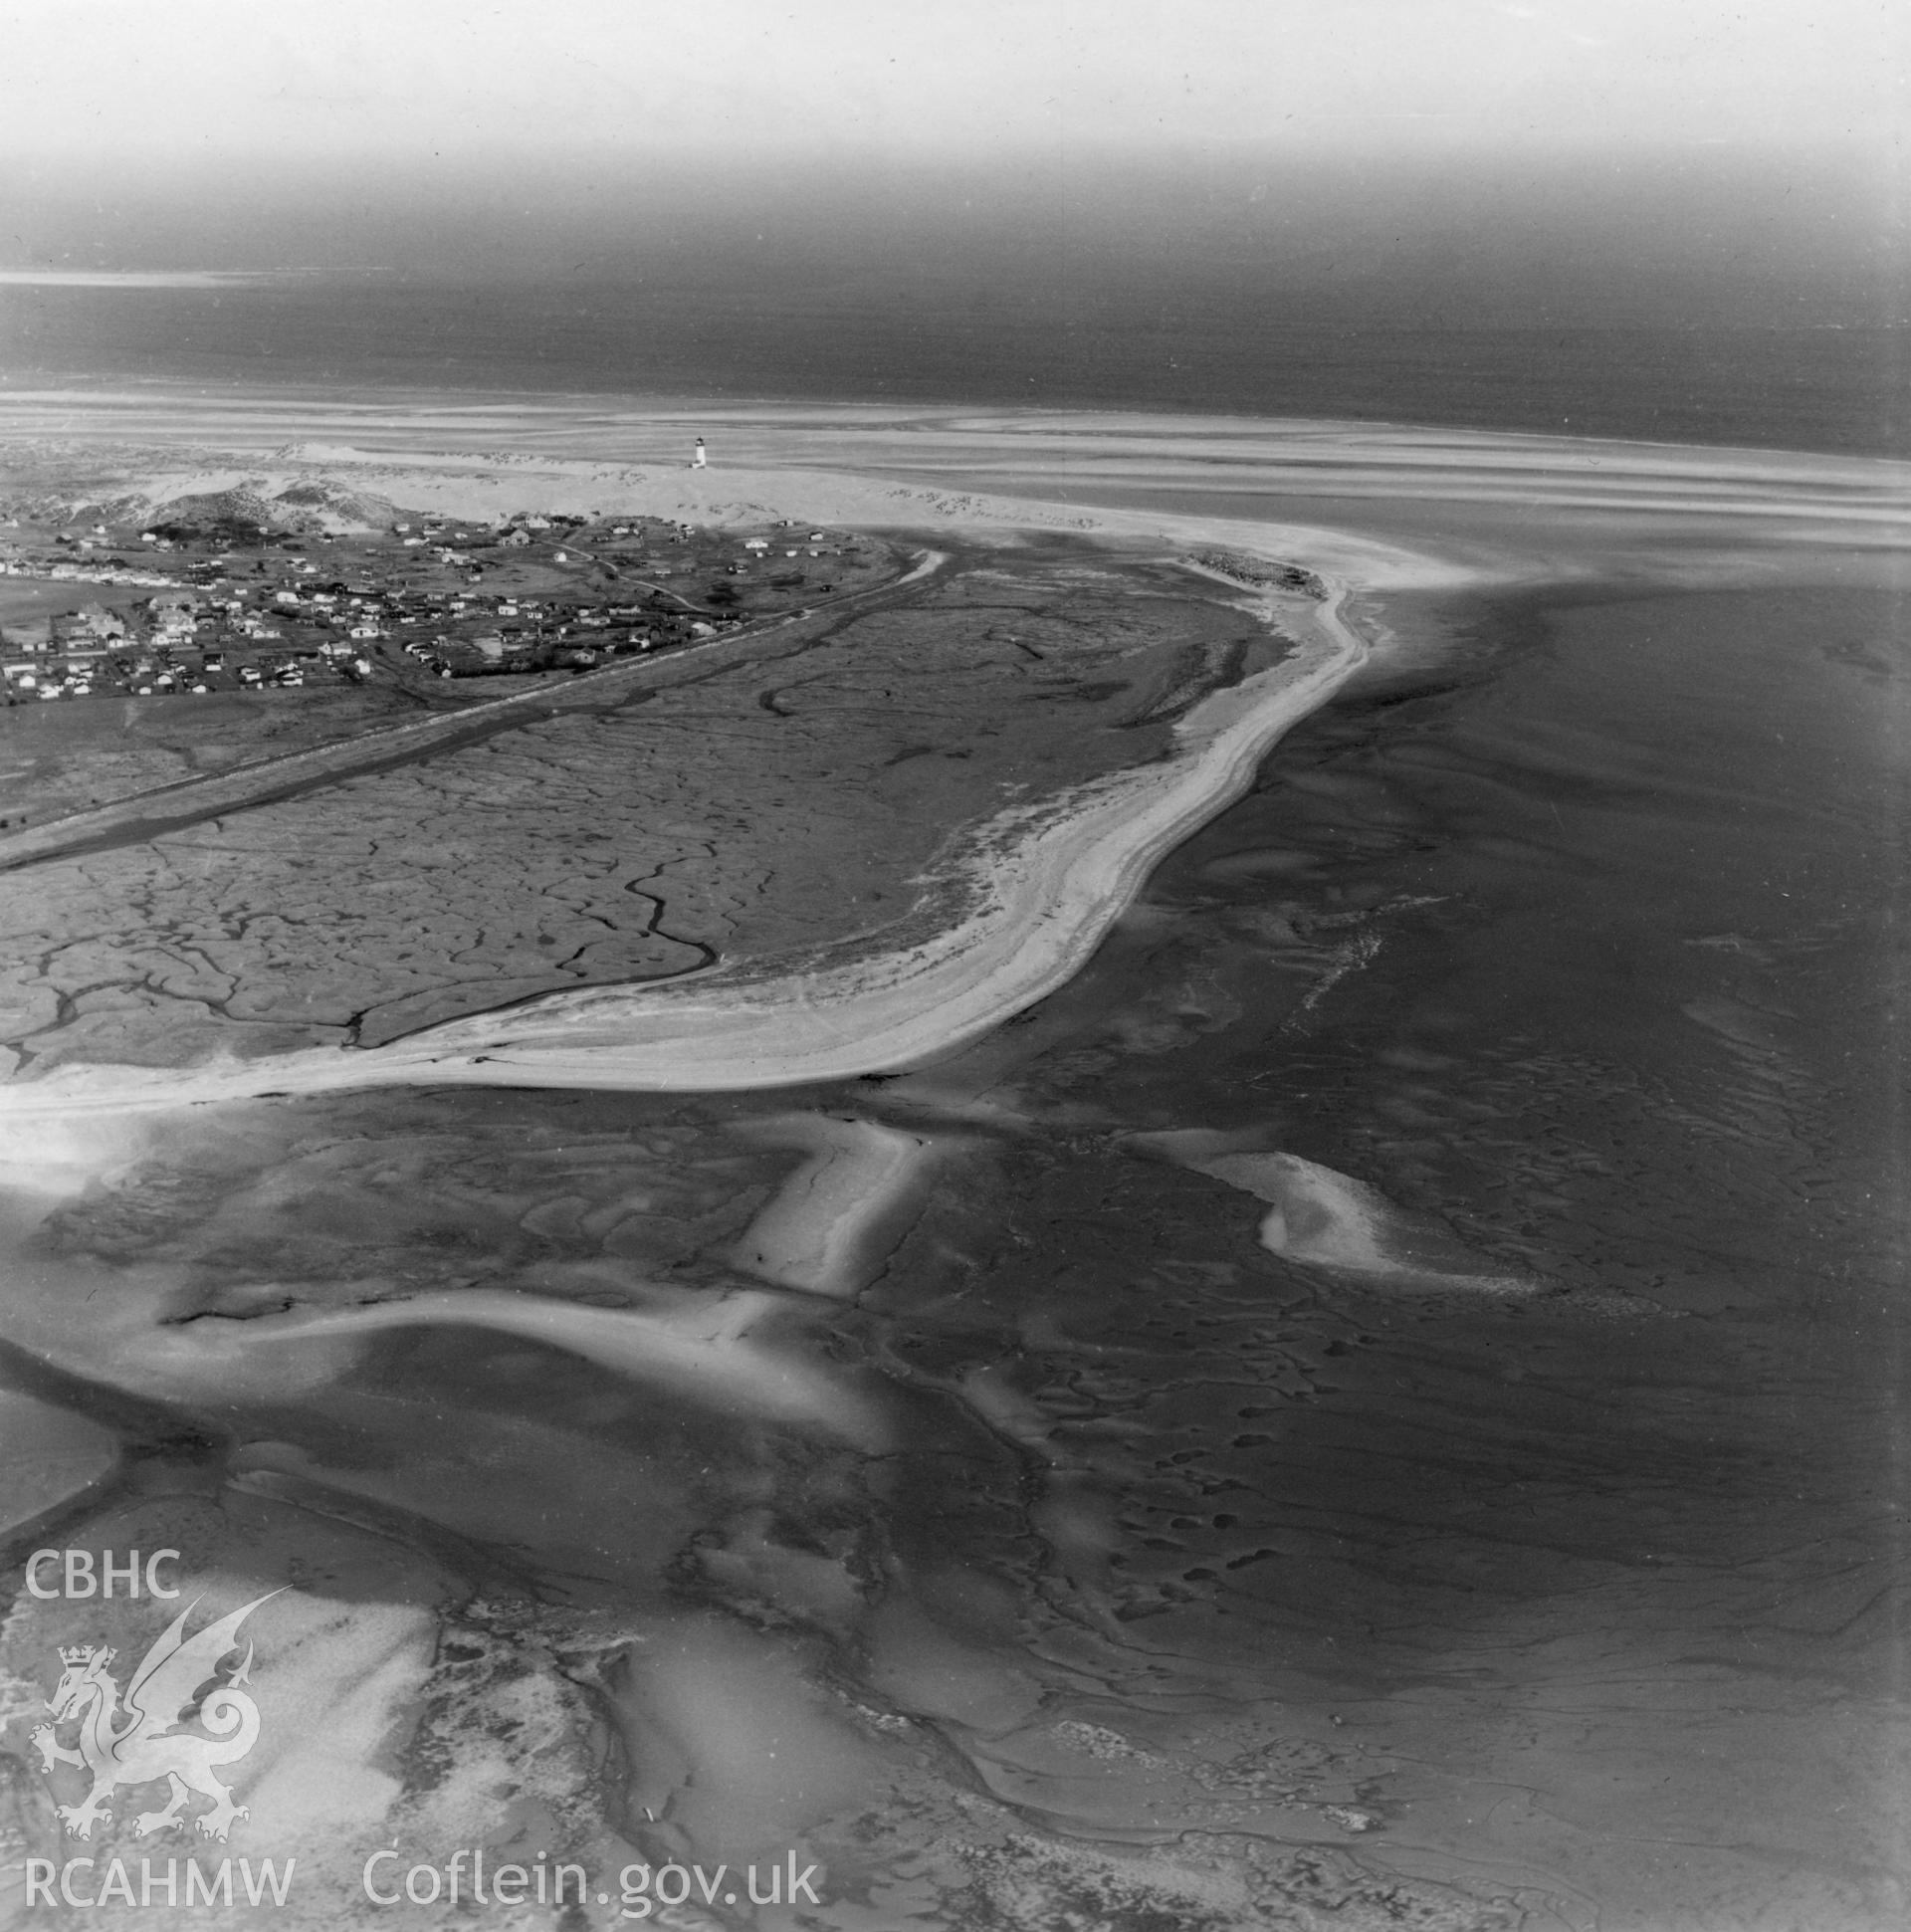 View of caravans and chalets on the Warren, Point of Ayr. Oblique aerial photograph, 5?" cut roll film.